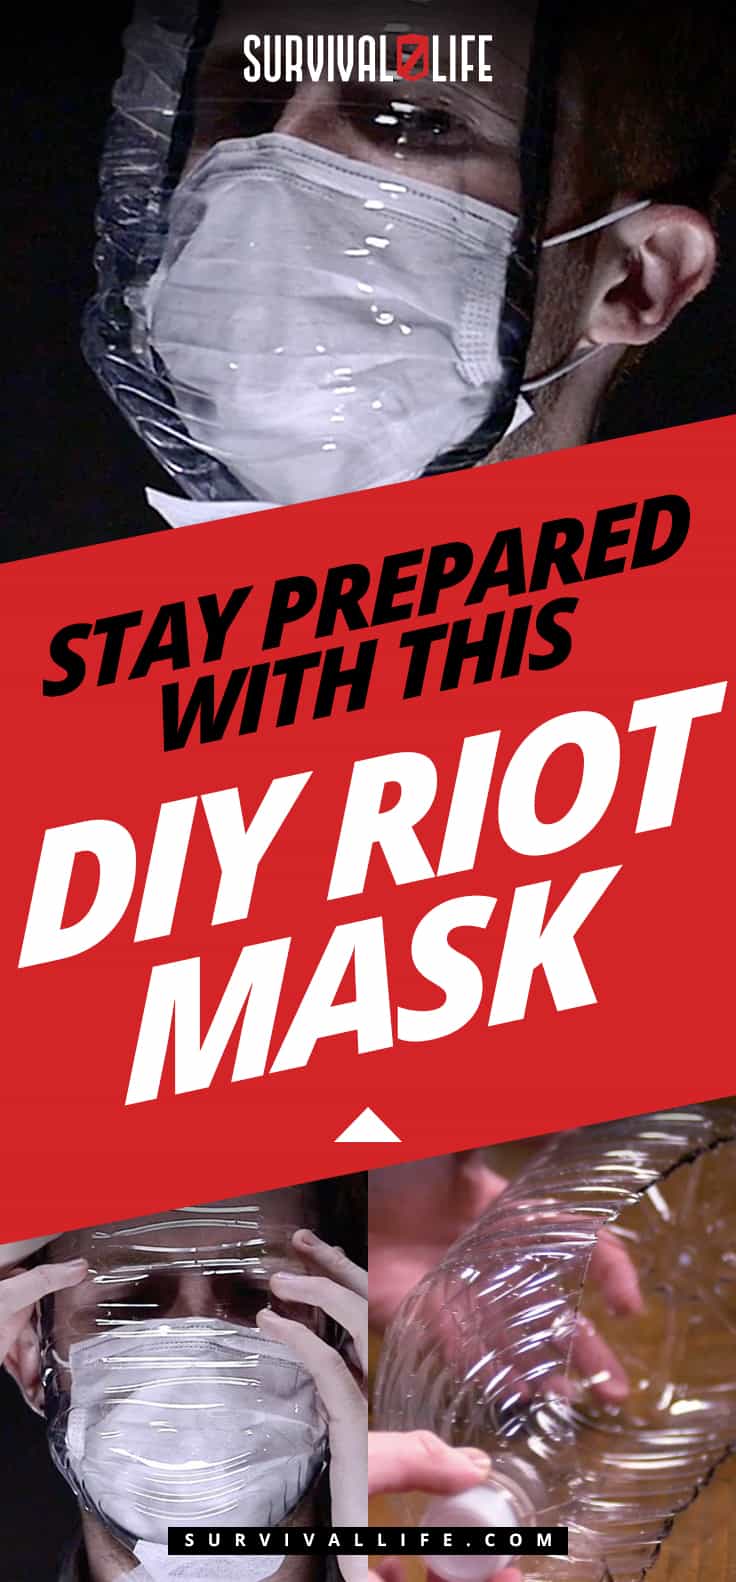 Stay Prepared With This DIY Riot Mask